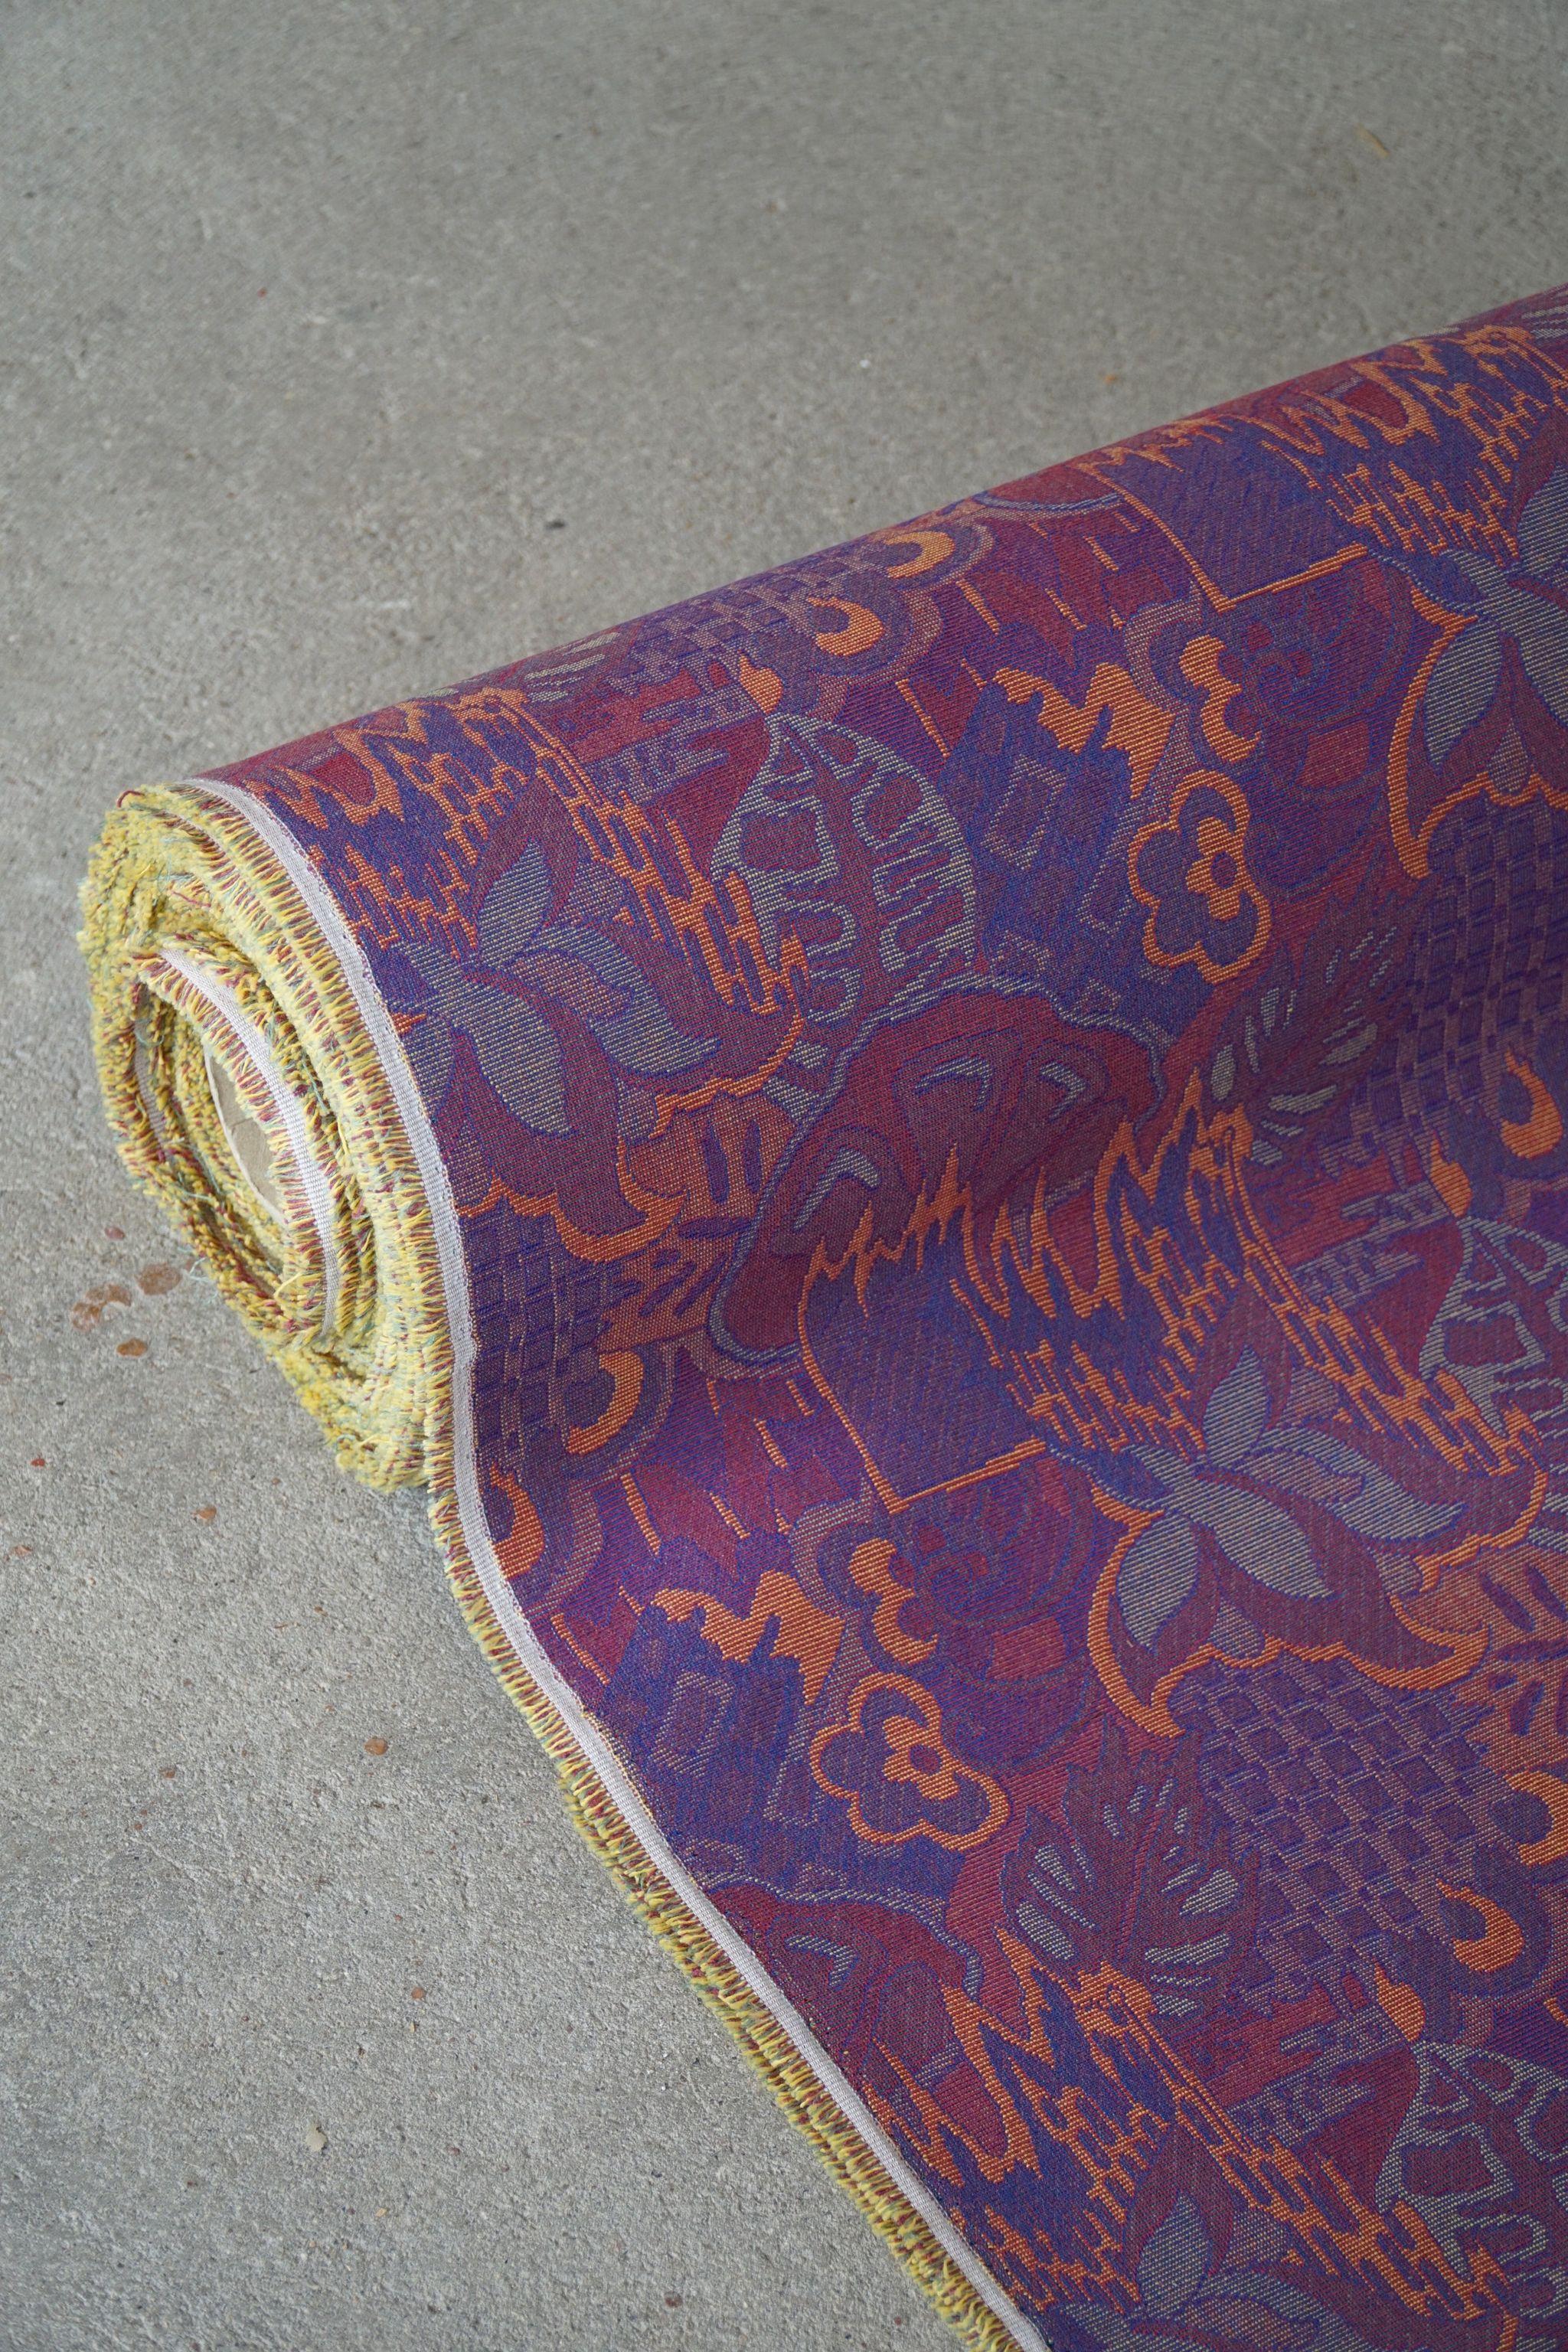 20th Century Vintage Gobelin Upholstery Fabric in Various Purple & Orange Colors, Late 20th C For Sale